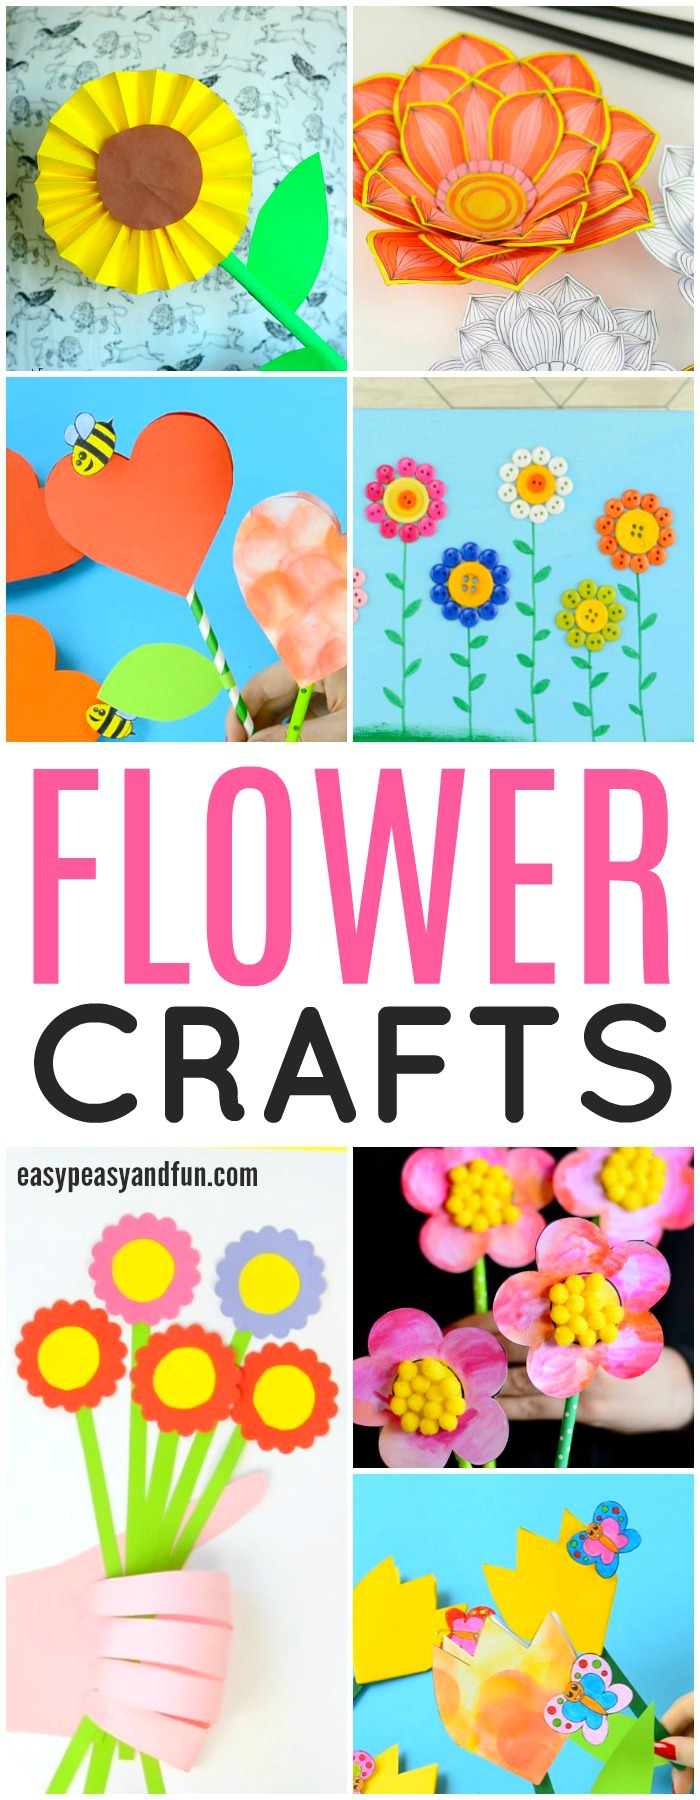 A lot of fun flower crafts for kids. Craft ideas and printable designs.